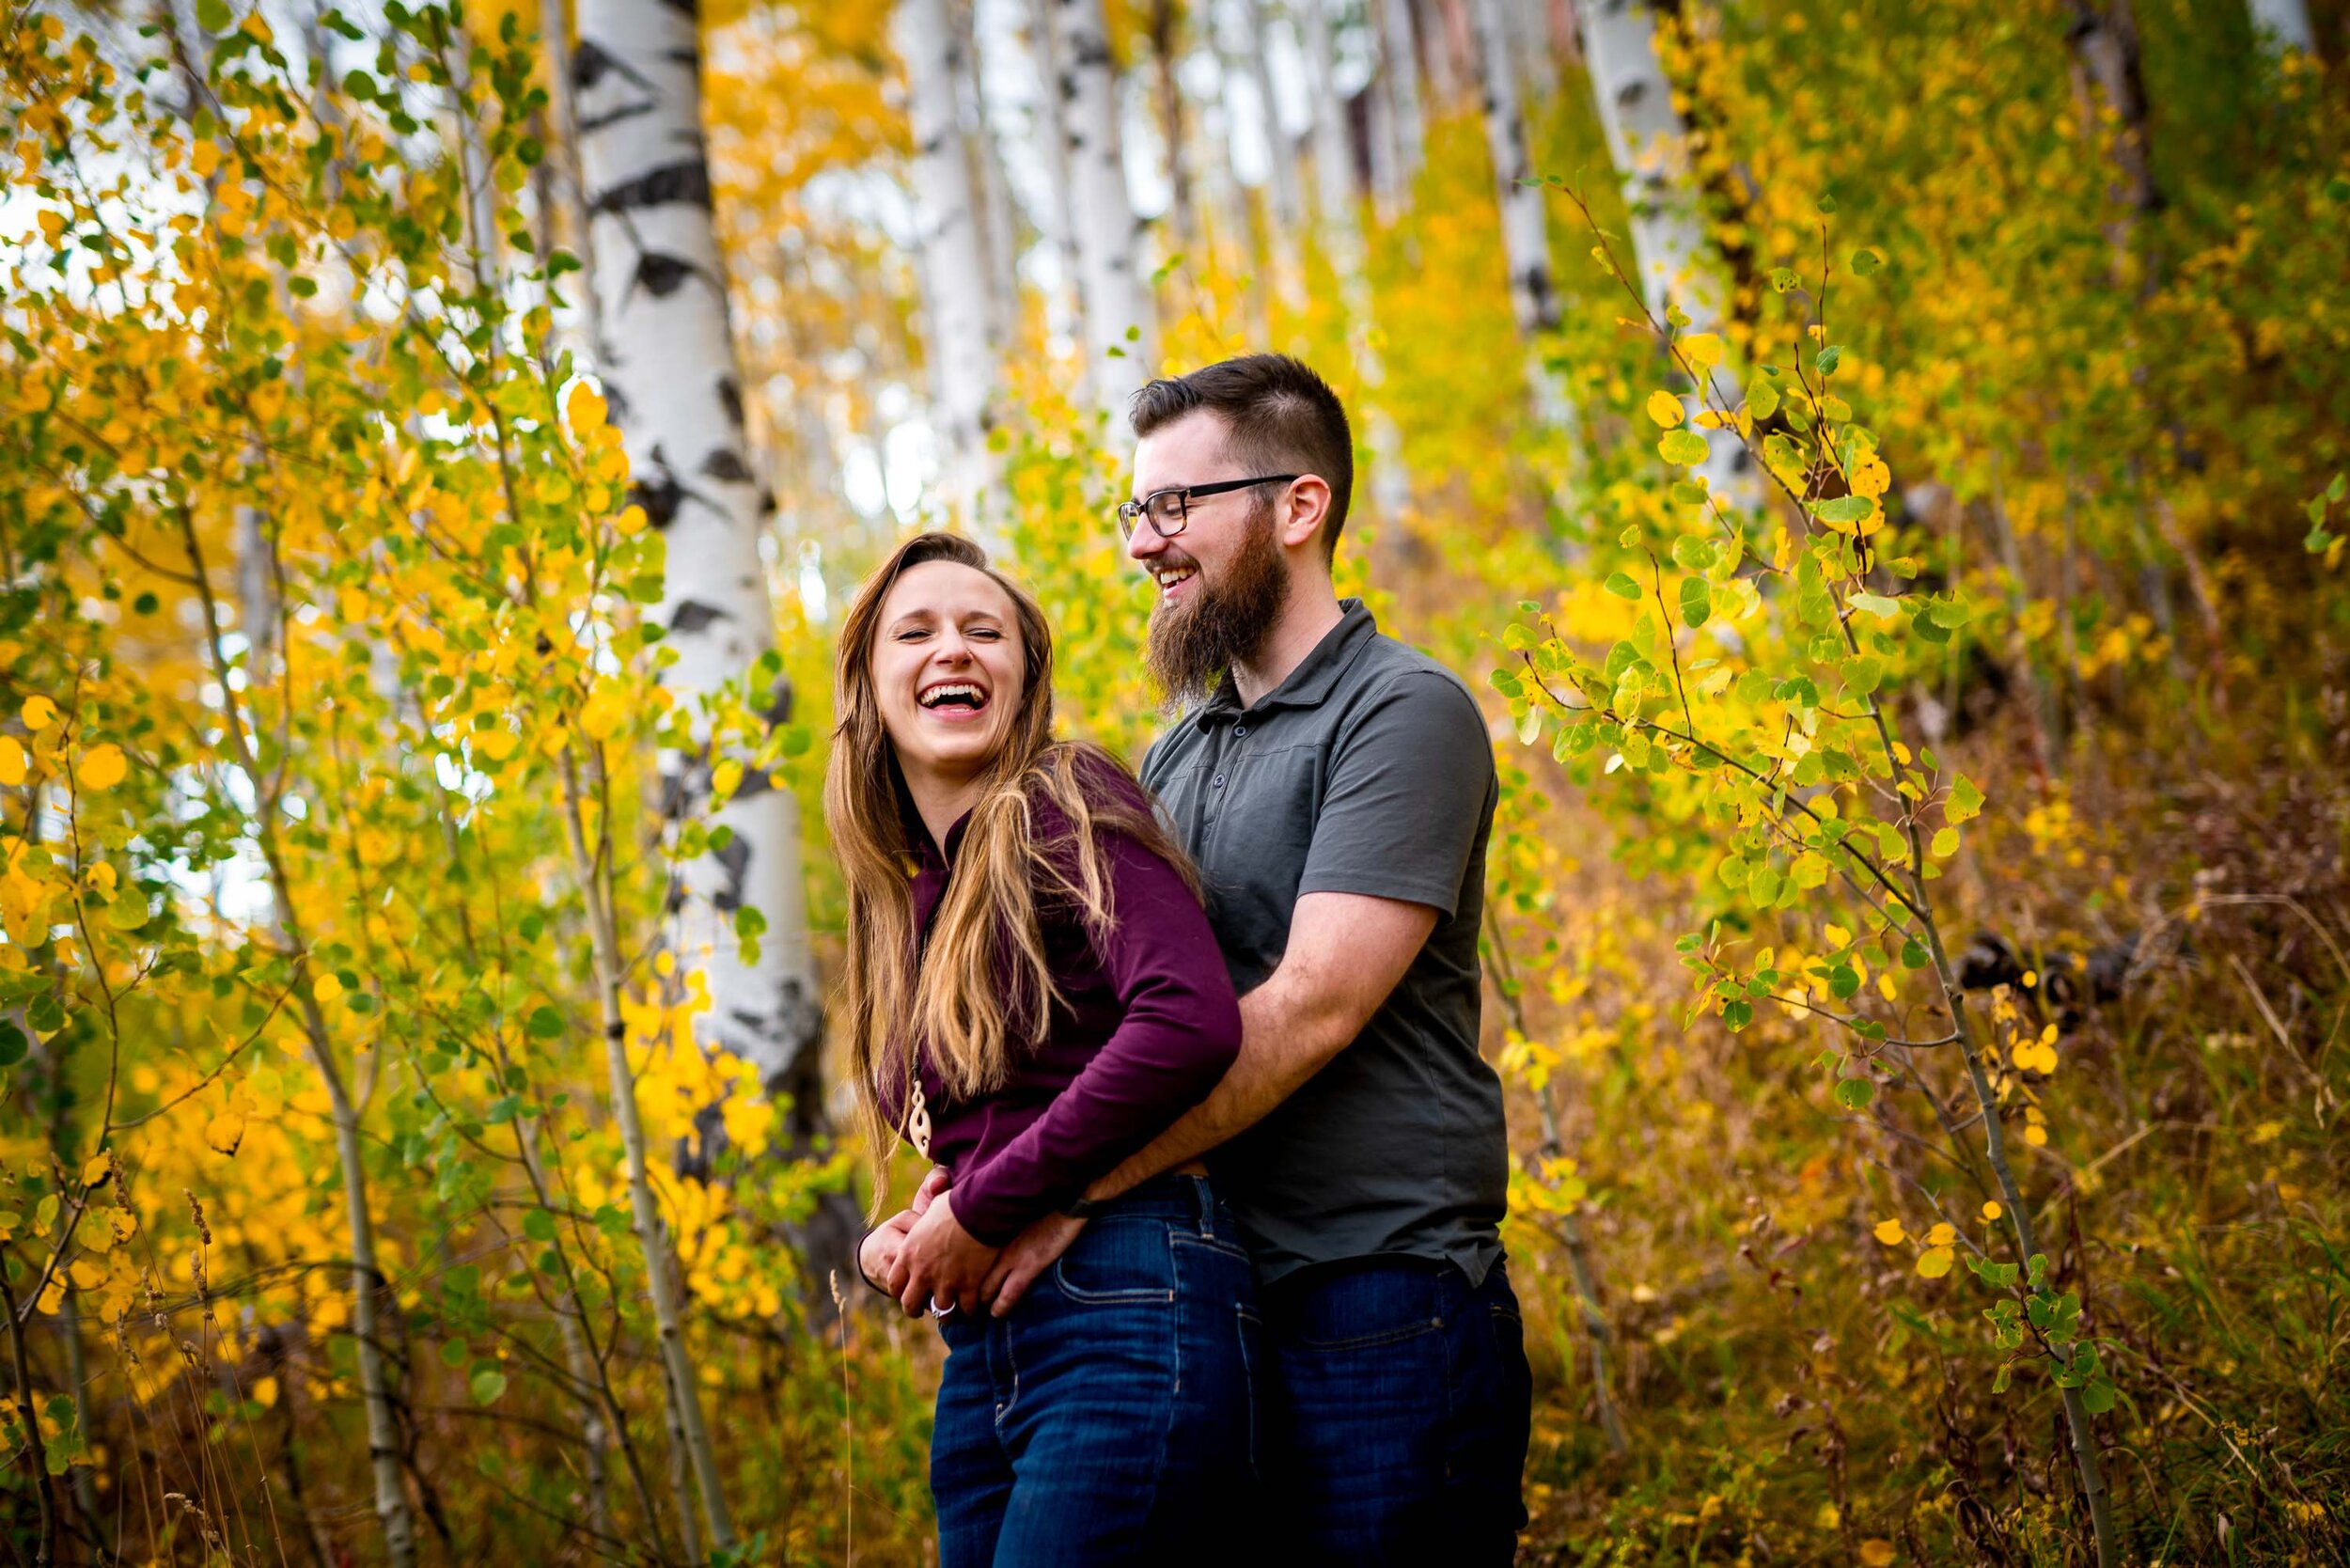 Engaged couple embraces for a portrait while surrounded by golden Aspen trees, Engagement Session, Engagement Photos, Engagement Photos Inspiration, Engagement Photography, Engagement Photographer, Fall Engagement Photos, Mountain Engagement Photos, Piney River Ranch engagement photos, Vail engagement session, Vail engagement photos, Vail engagement photography, Vail engagement photographer, Vail engagement inspiration, Colorado engagement session, Colorado engagement photos, Colorado engagement photography, Colorado engagement photographer, Colorado engagement inspiration